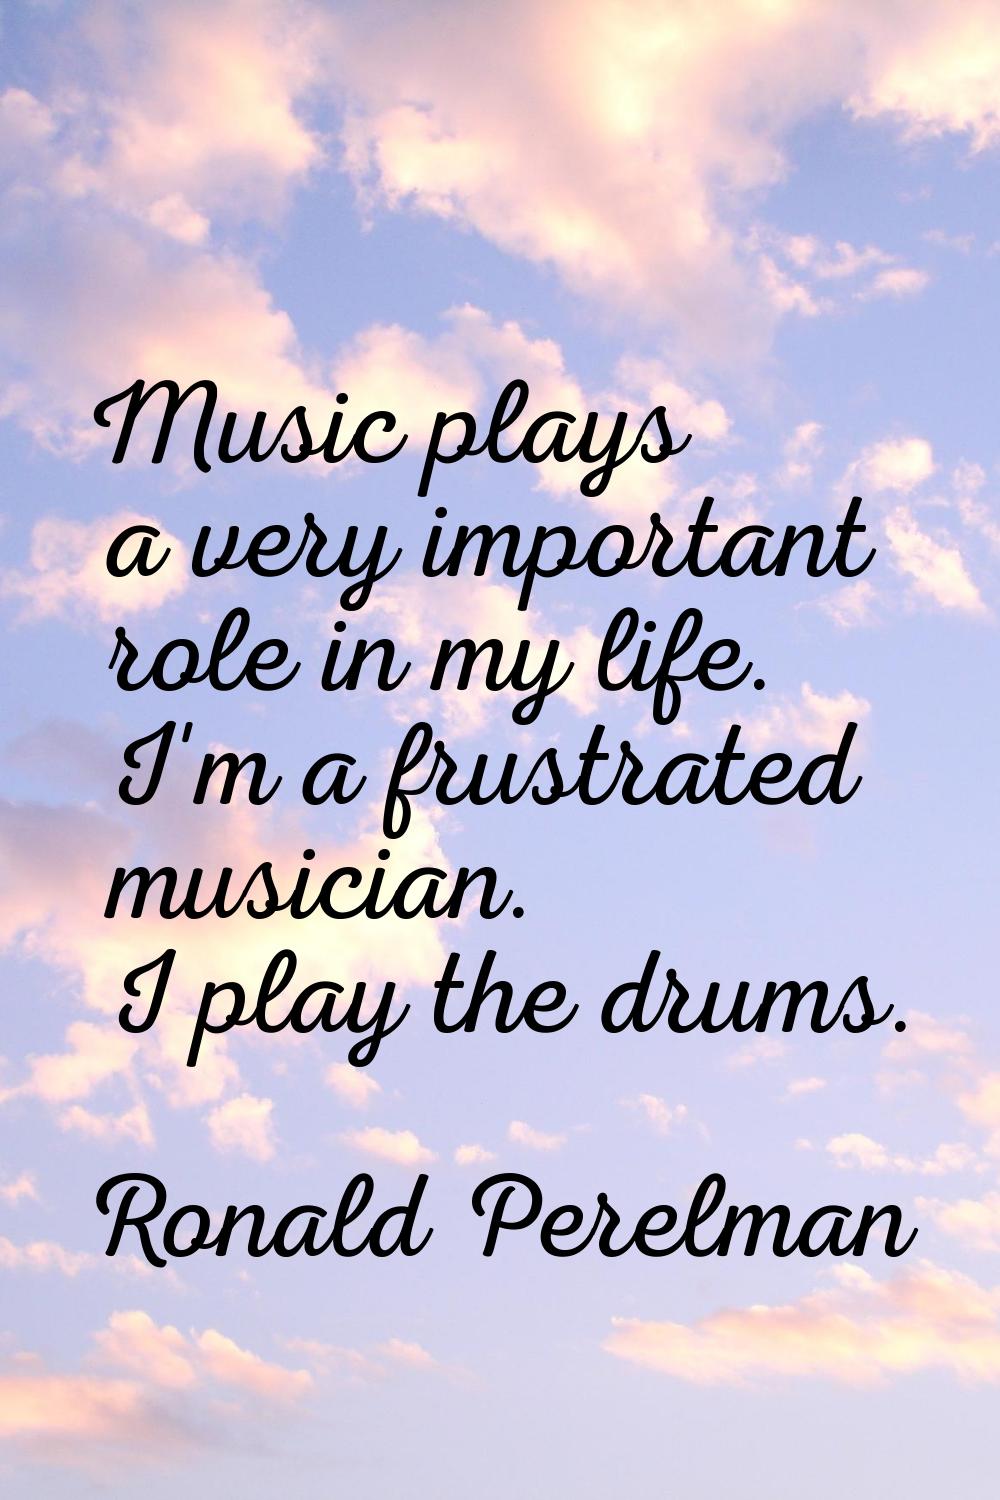 Music plays a very important role in my life. I'm a frustrated musician. I play the drums.